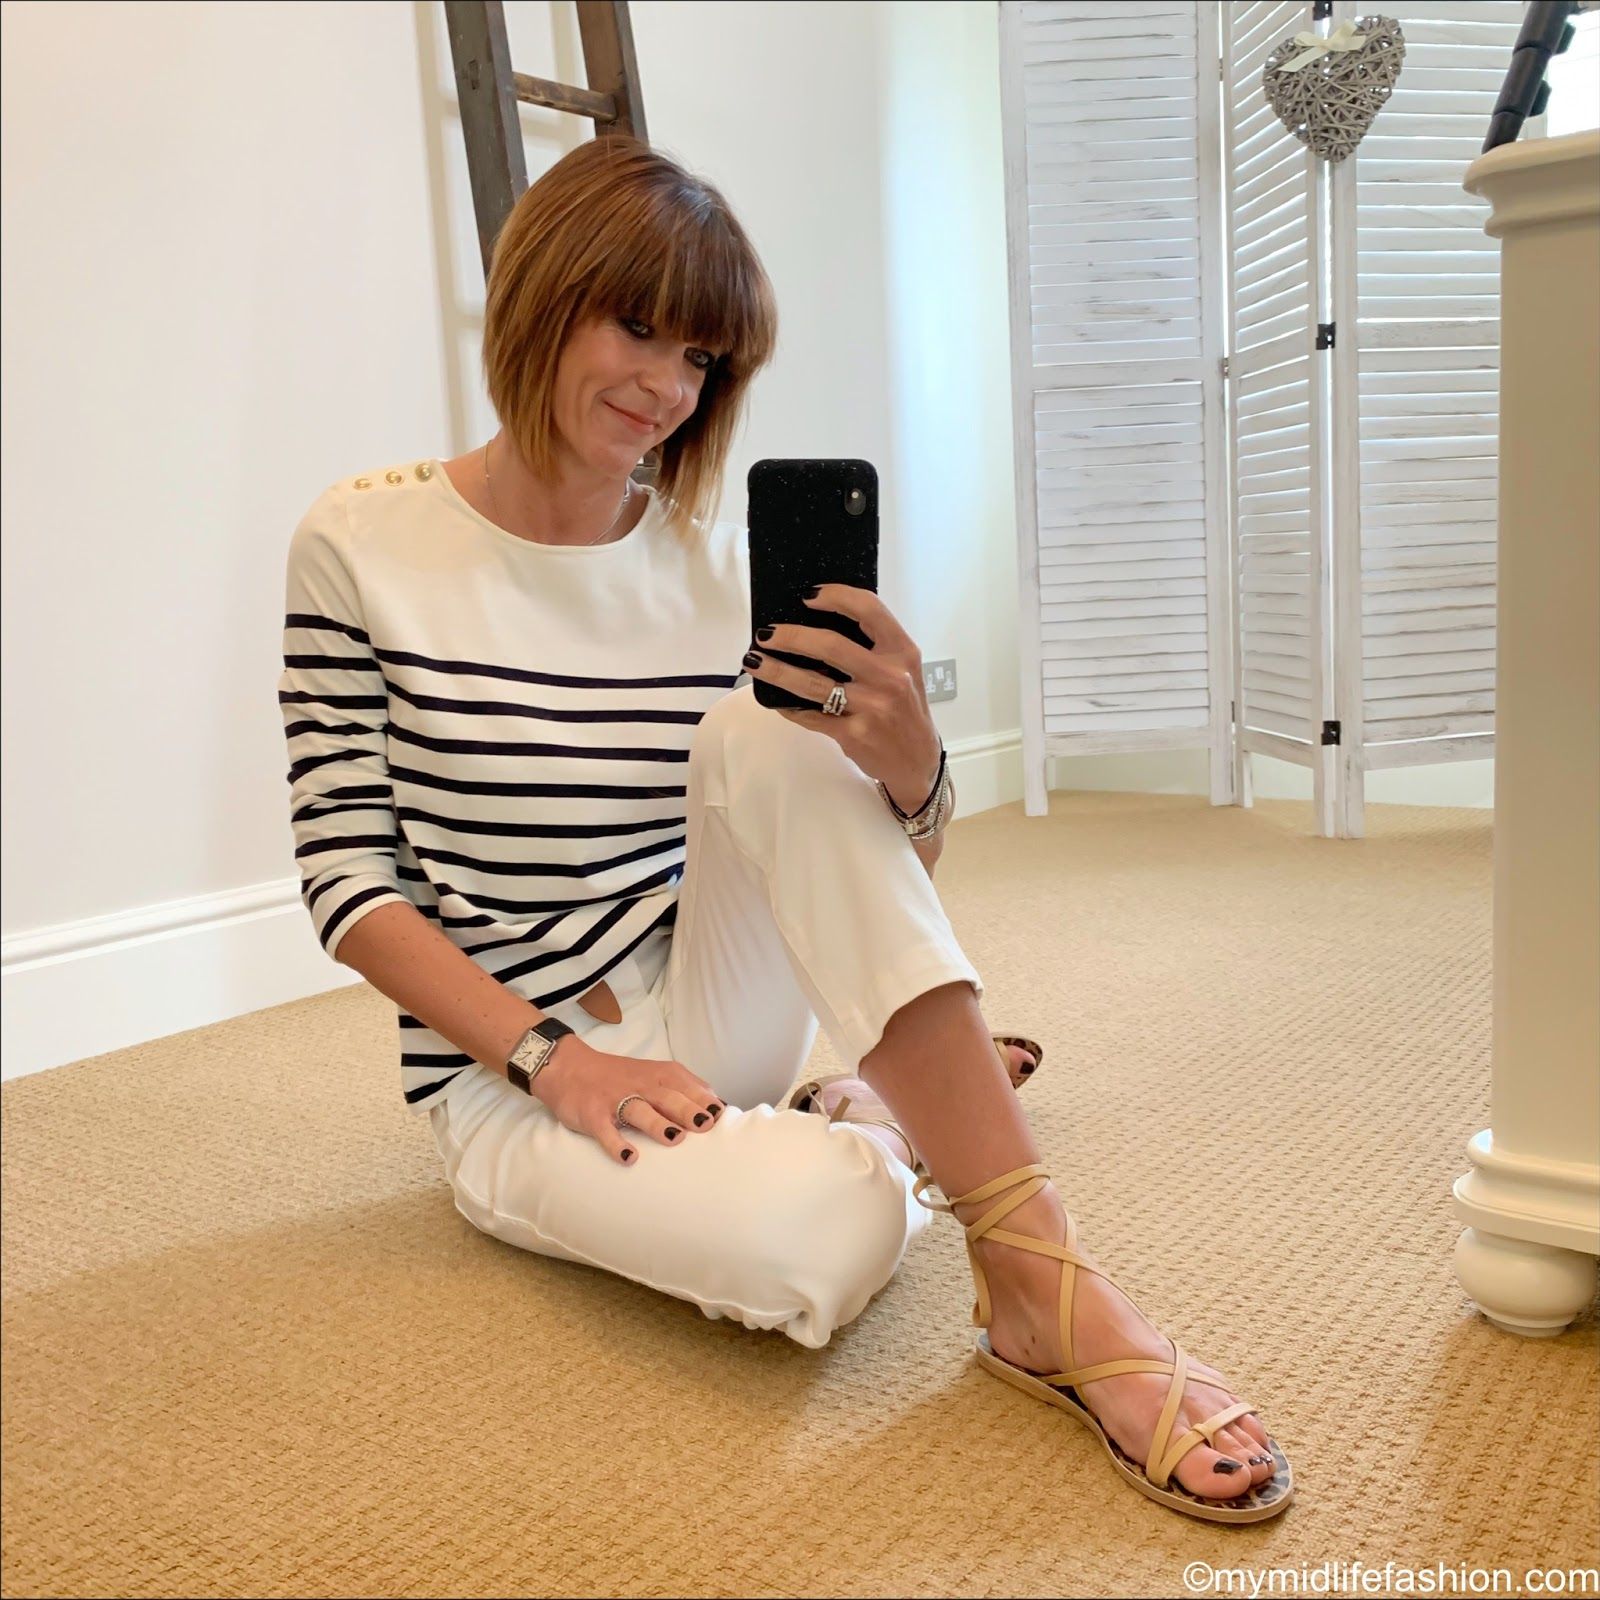 my midlife fashion, sezane loic striped jersey, Isabel Marant lecce leather belt, Ancient Greek sandals morif leather sandals, j crew straight leg crop jean in garment dyed cotton 